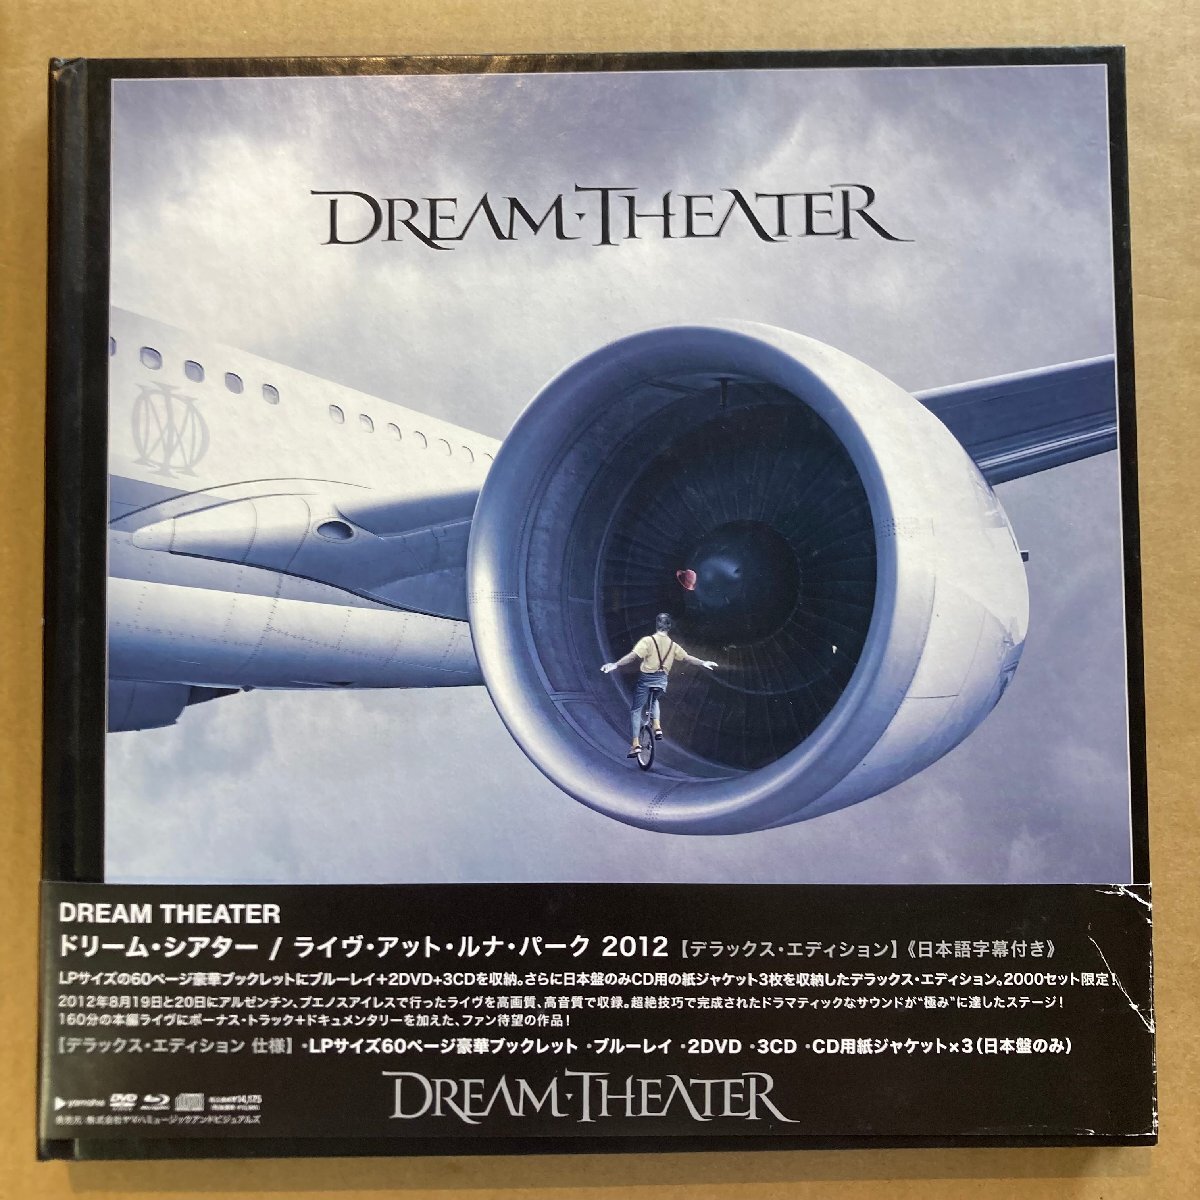 *DREAM THEATER /LIVE AT LUNA PARK 2012 Deluxe * edition BLU-RAY+2DVD+3CD/ YMXA10459* postage payment on delivery *URT